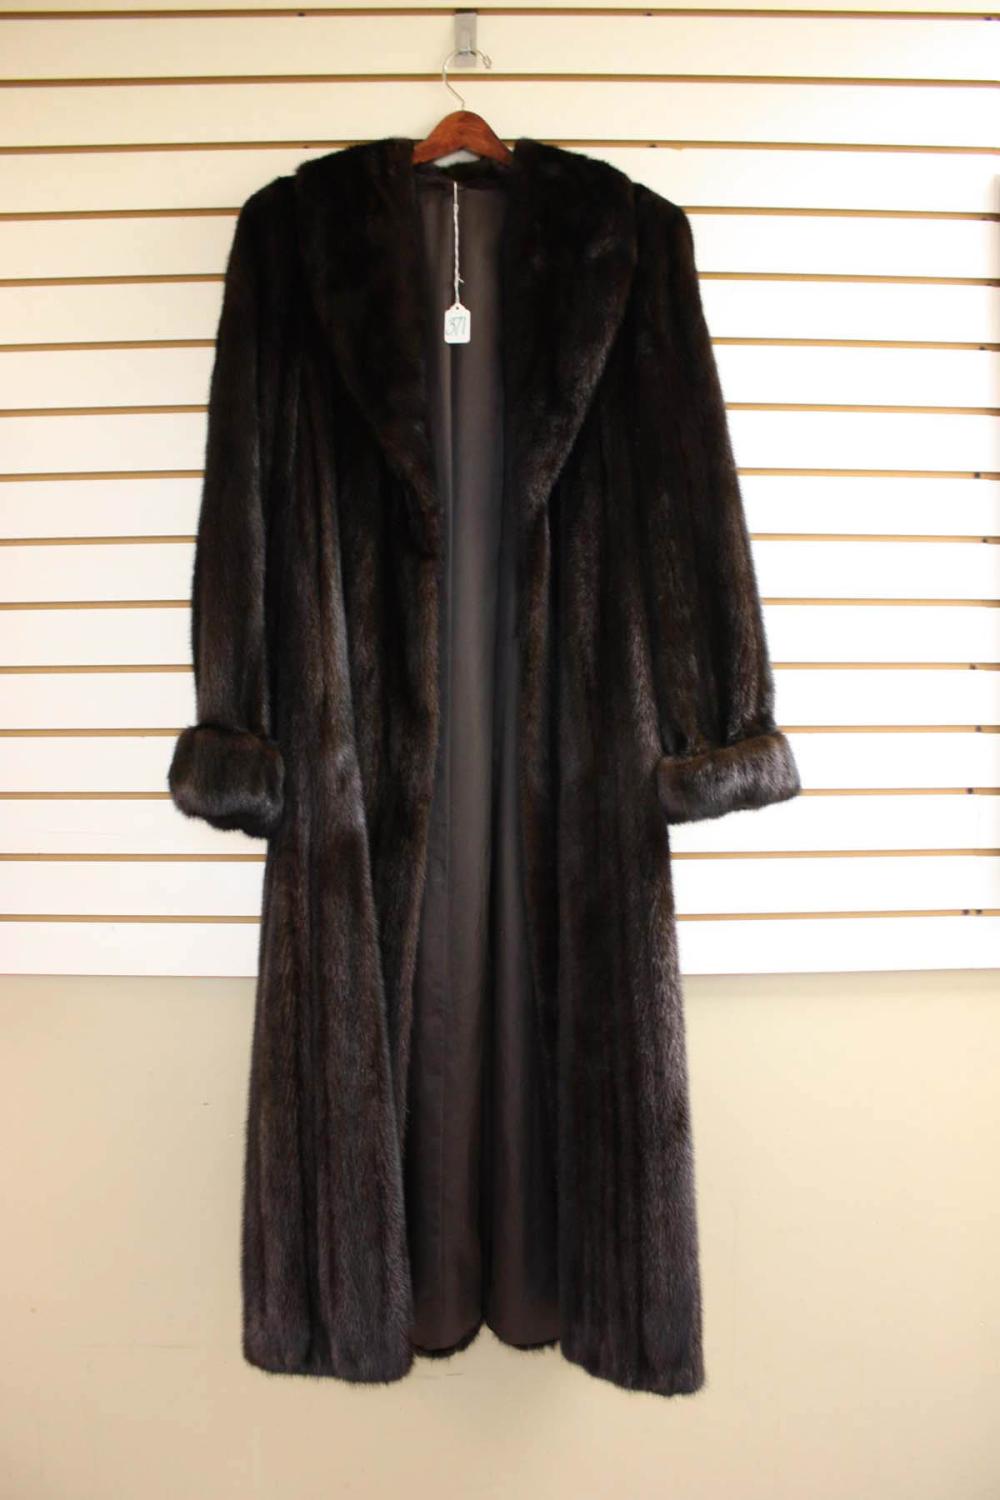 LADYS FULL LENGTH MINK FUR COAT, WITH